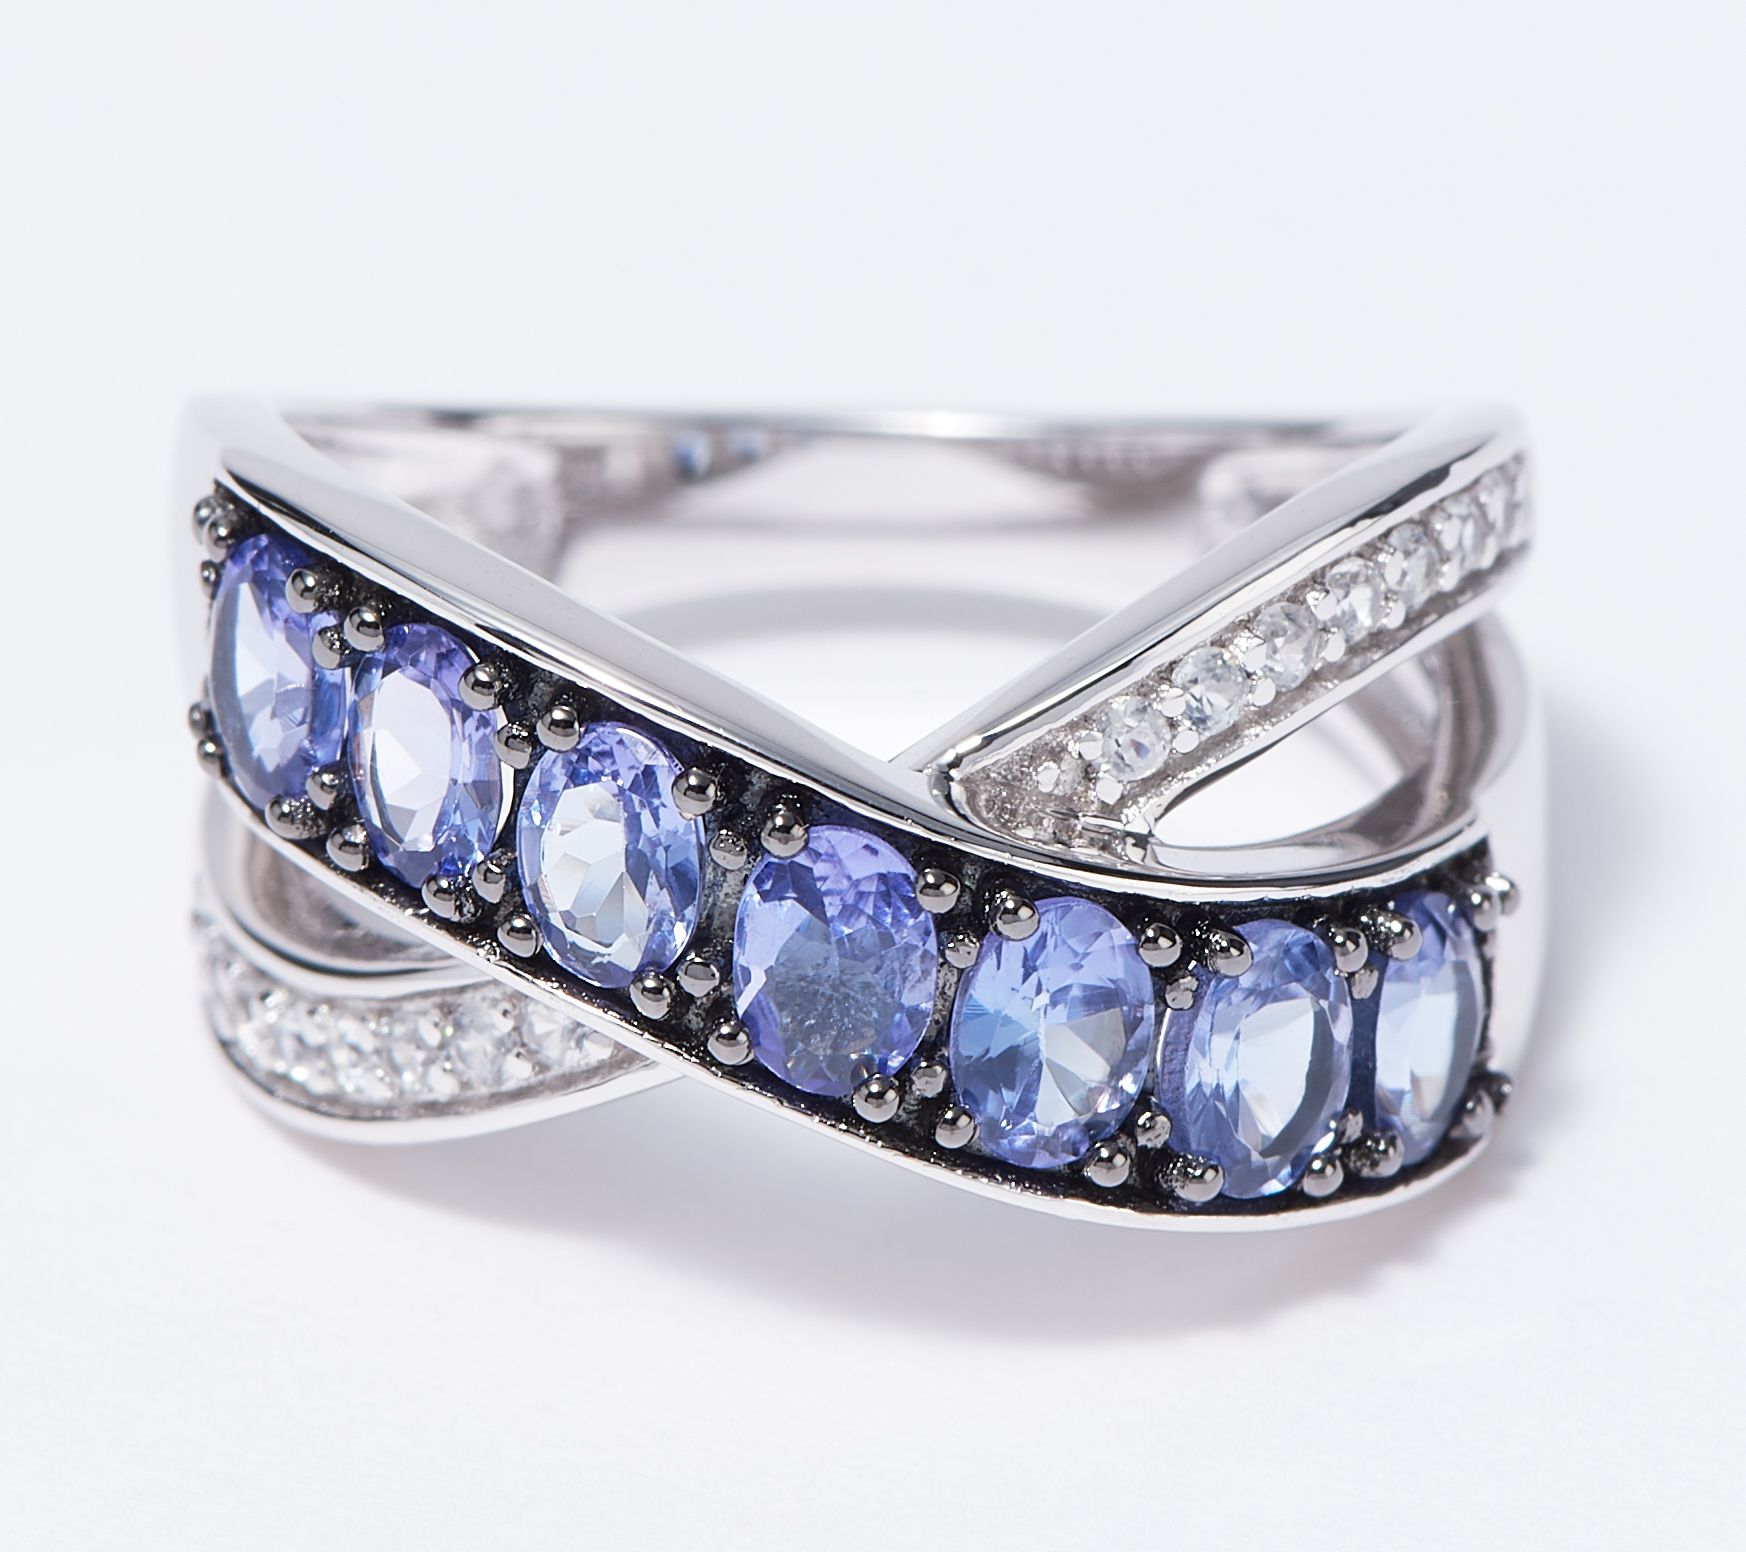 Bonyak Jewelry Genuine Oval Tanzanite and White Topaz Ring in Sterling Silver Size 6.00 